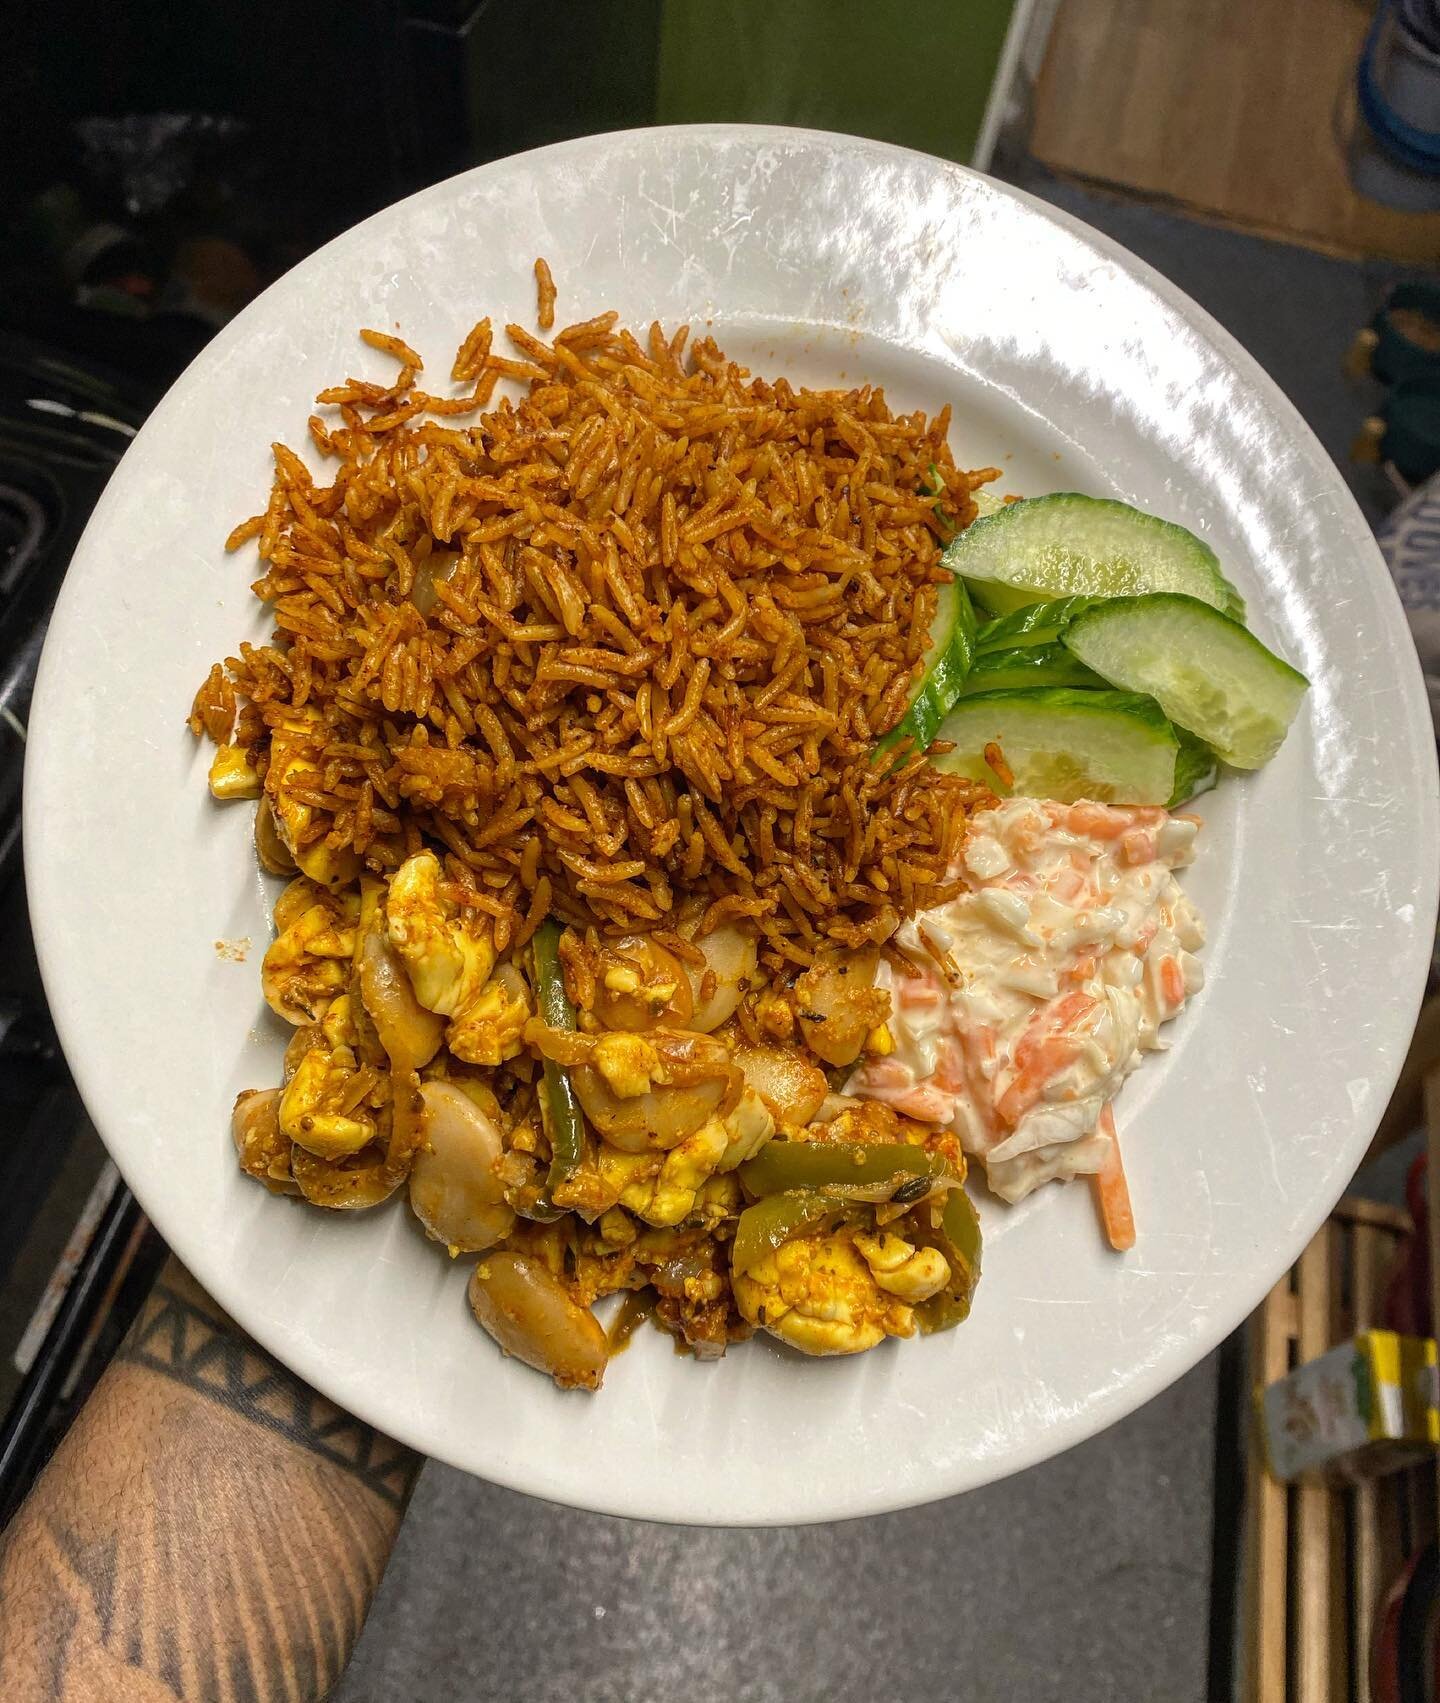 This meal right here 🥹🥹
💚Jollof Rice
💚Ackee and Butter beans
💚Coleslaw @sainsburys 
💚Cucumber
Everyone time I make a pot of Jollof rice I smile with pride. Who remembers the days when I would be on here asking for help? It just never came out r